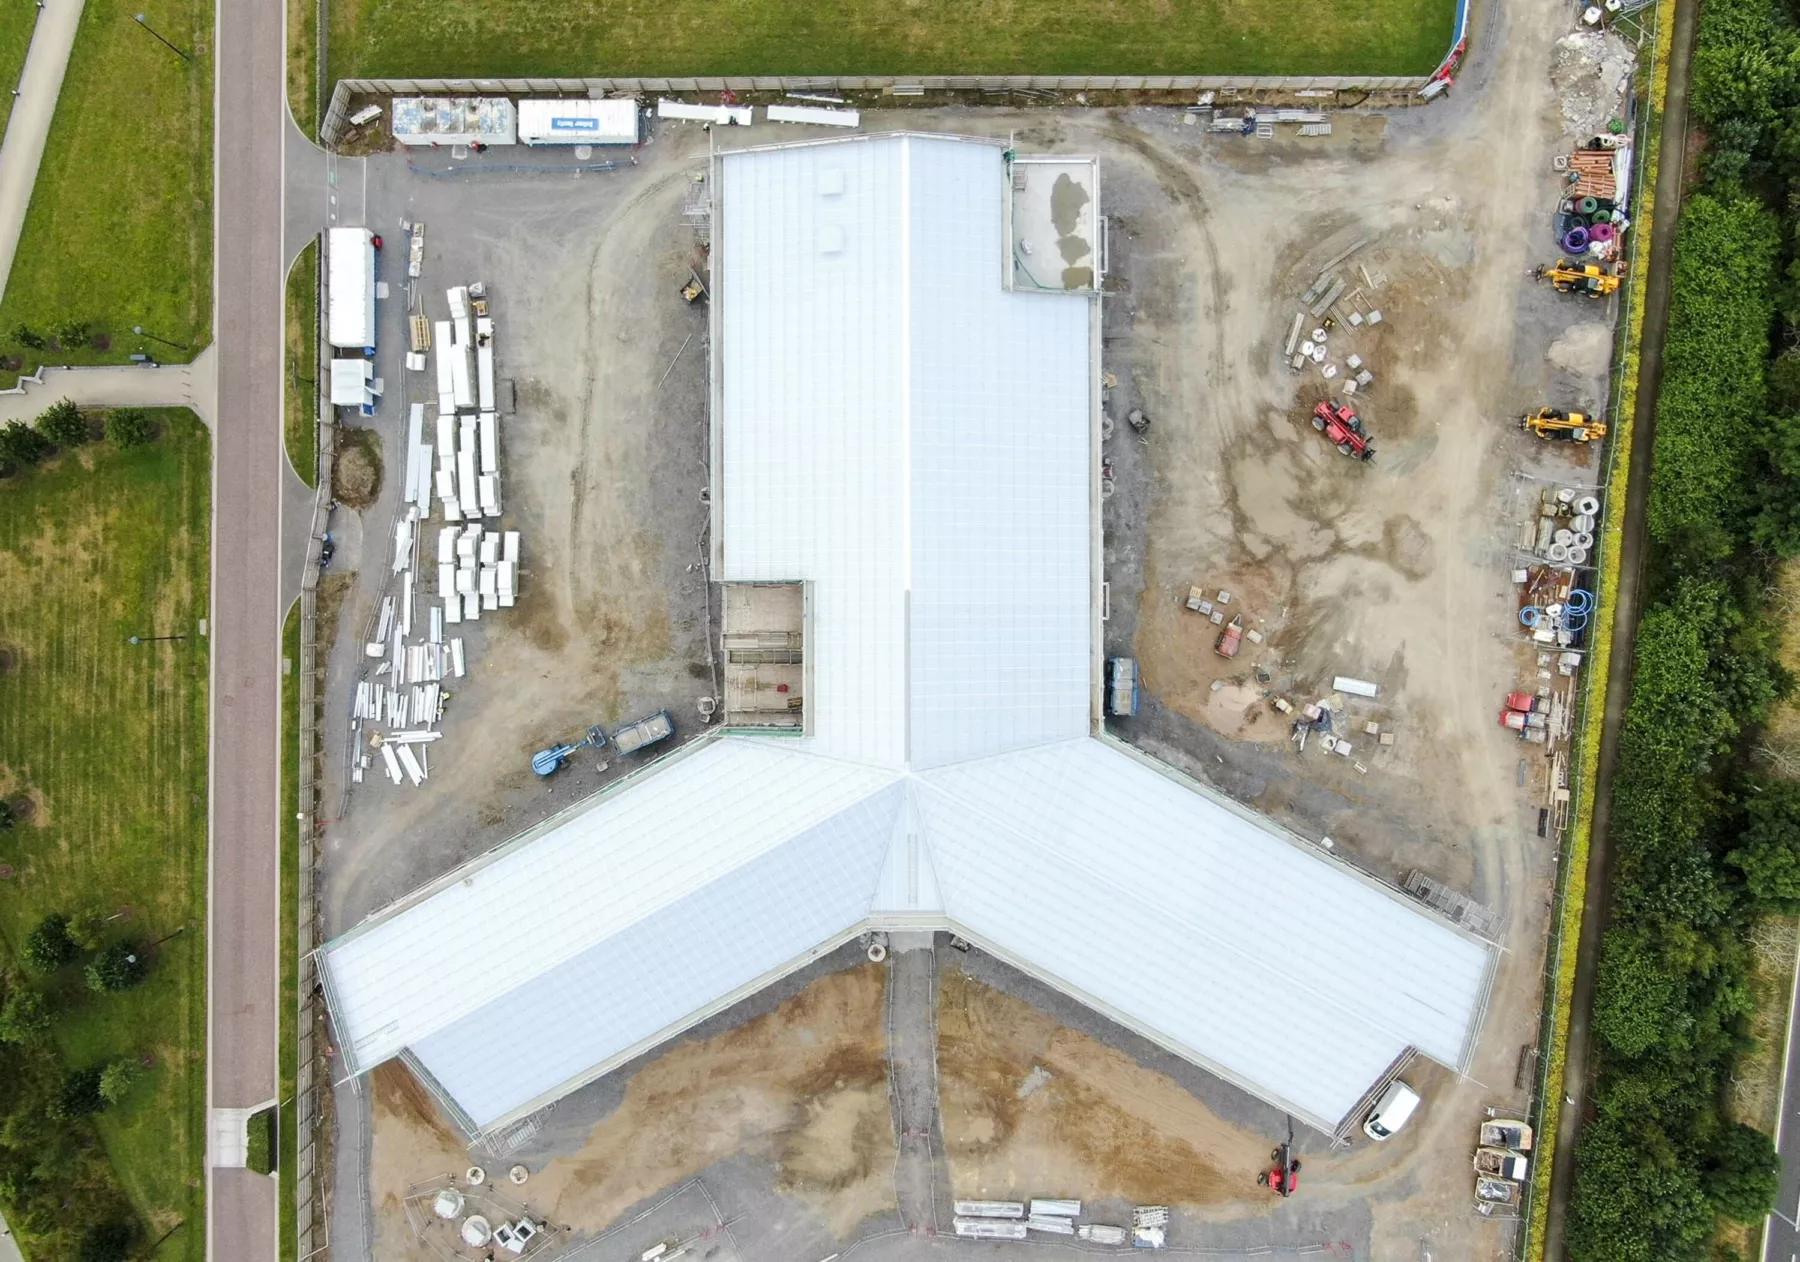 Construction works at the new healthcare facility - the National Treatment Centre - Highland, Inverness. This aerial view in plan shows the building's triad shape with three wings, and prior to its final bronze-gold cladding. Supplies and construction vehicles are around the building, which has had no landscaping yet completed.